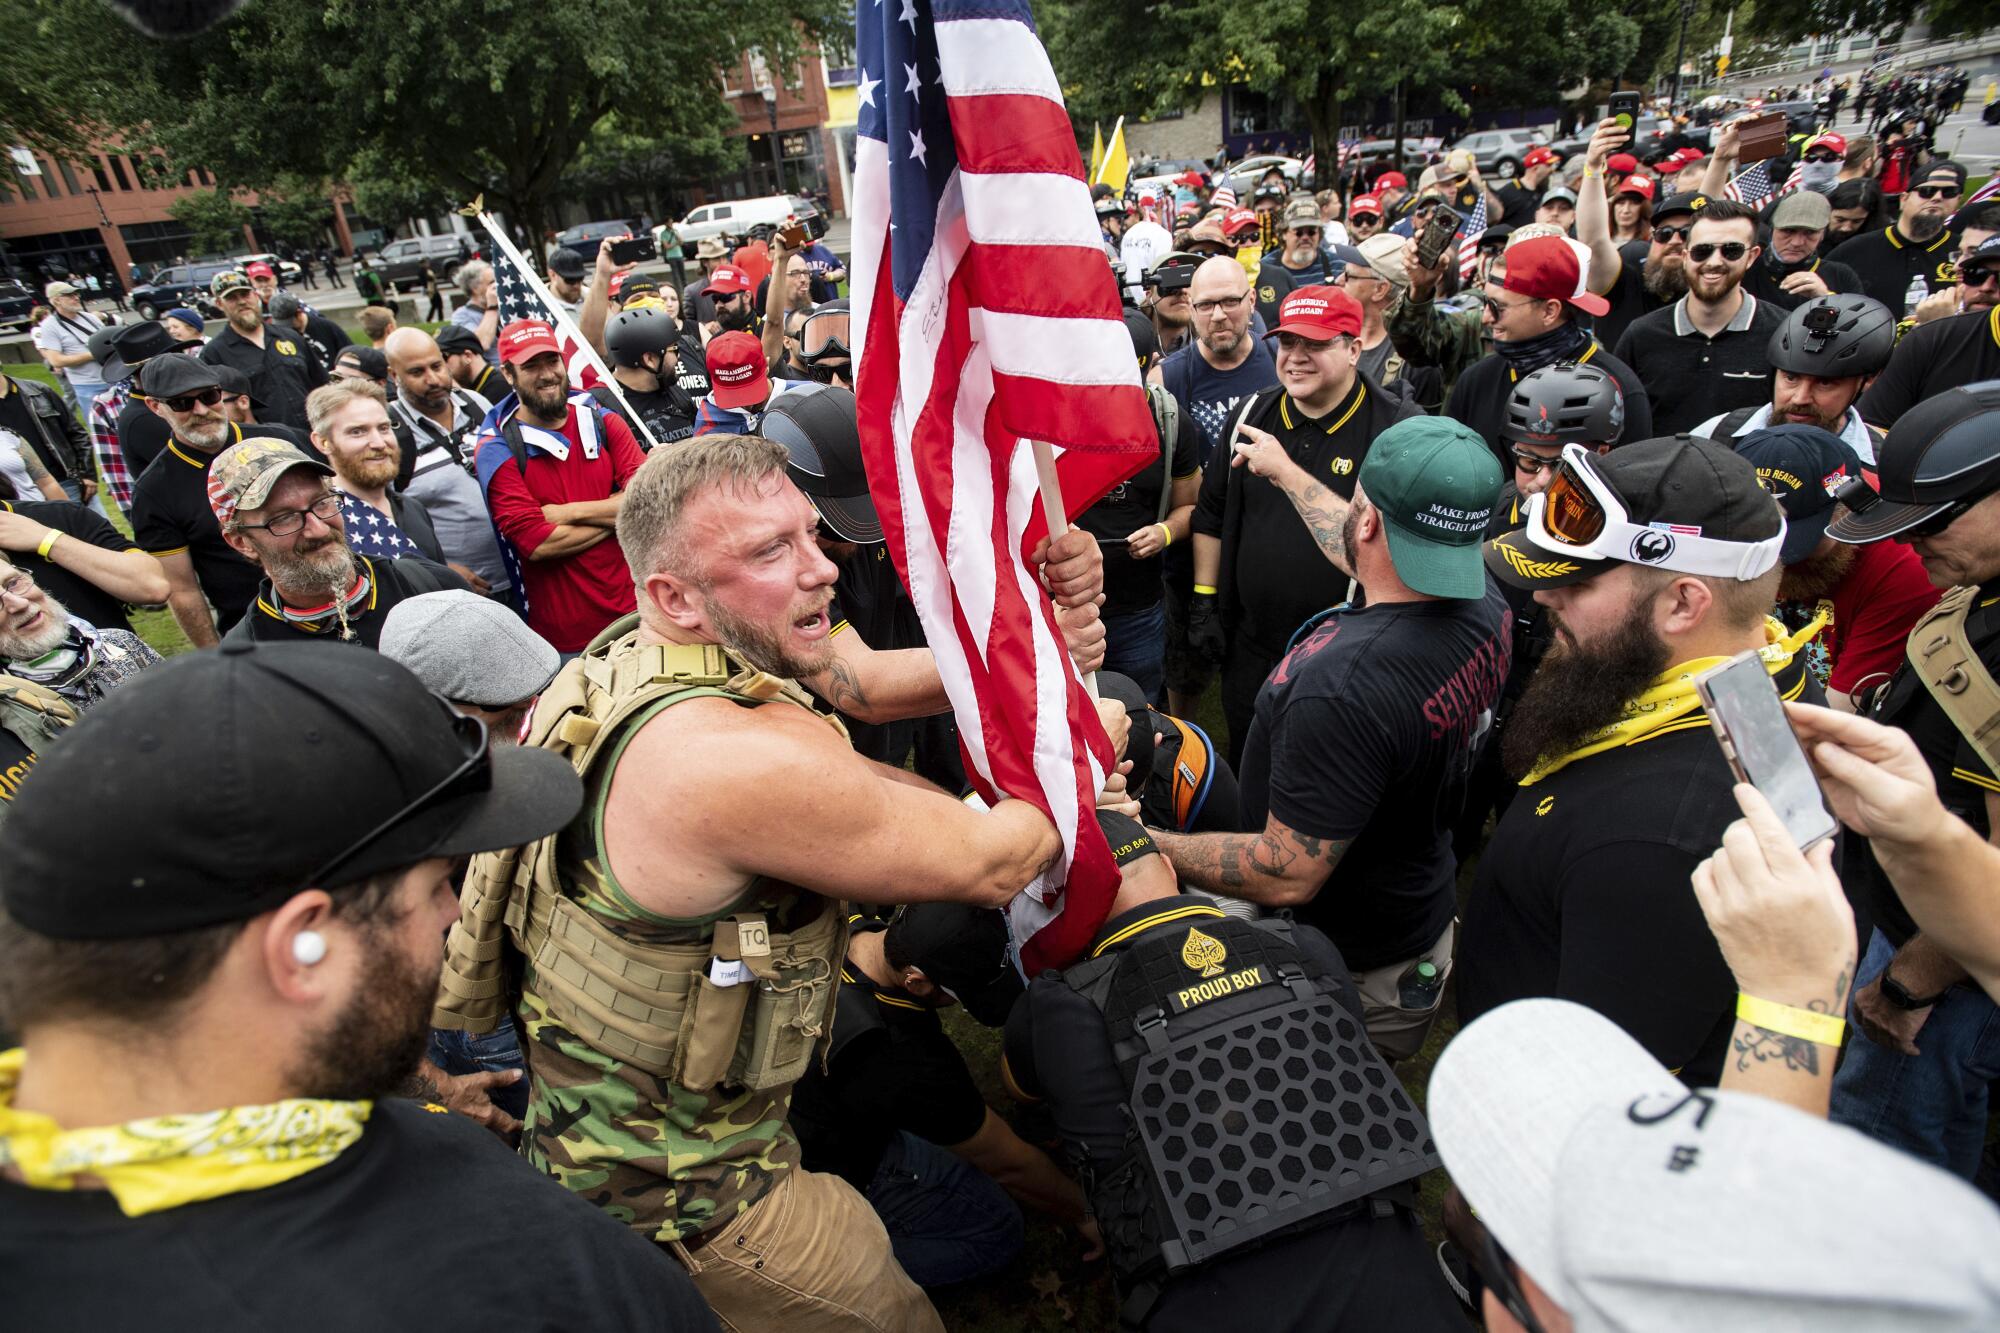 Proud Boys demonstrators in tactical vests plant a U.S. flag in a park